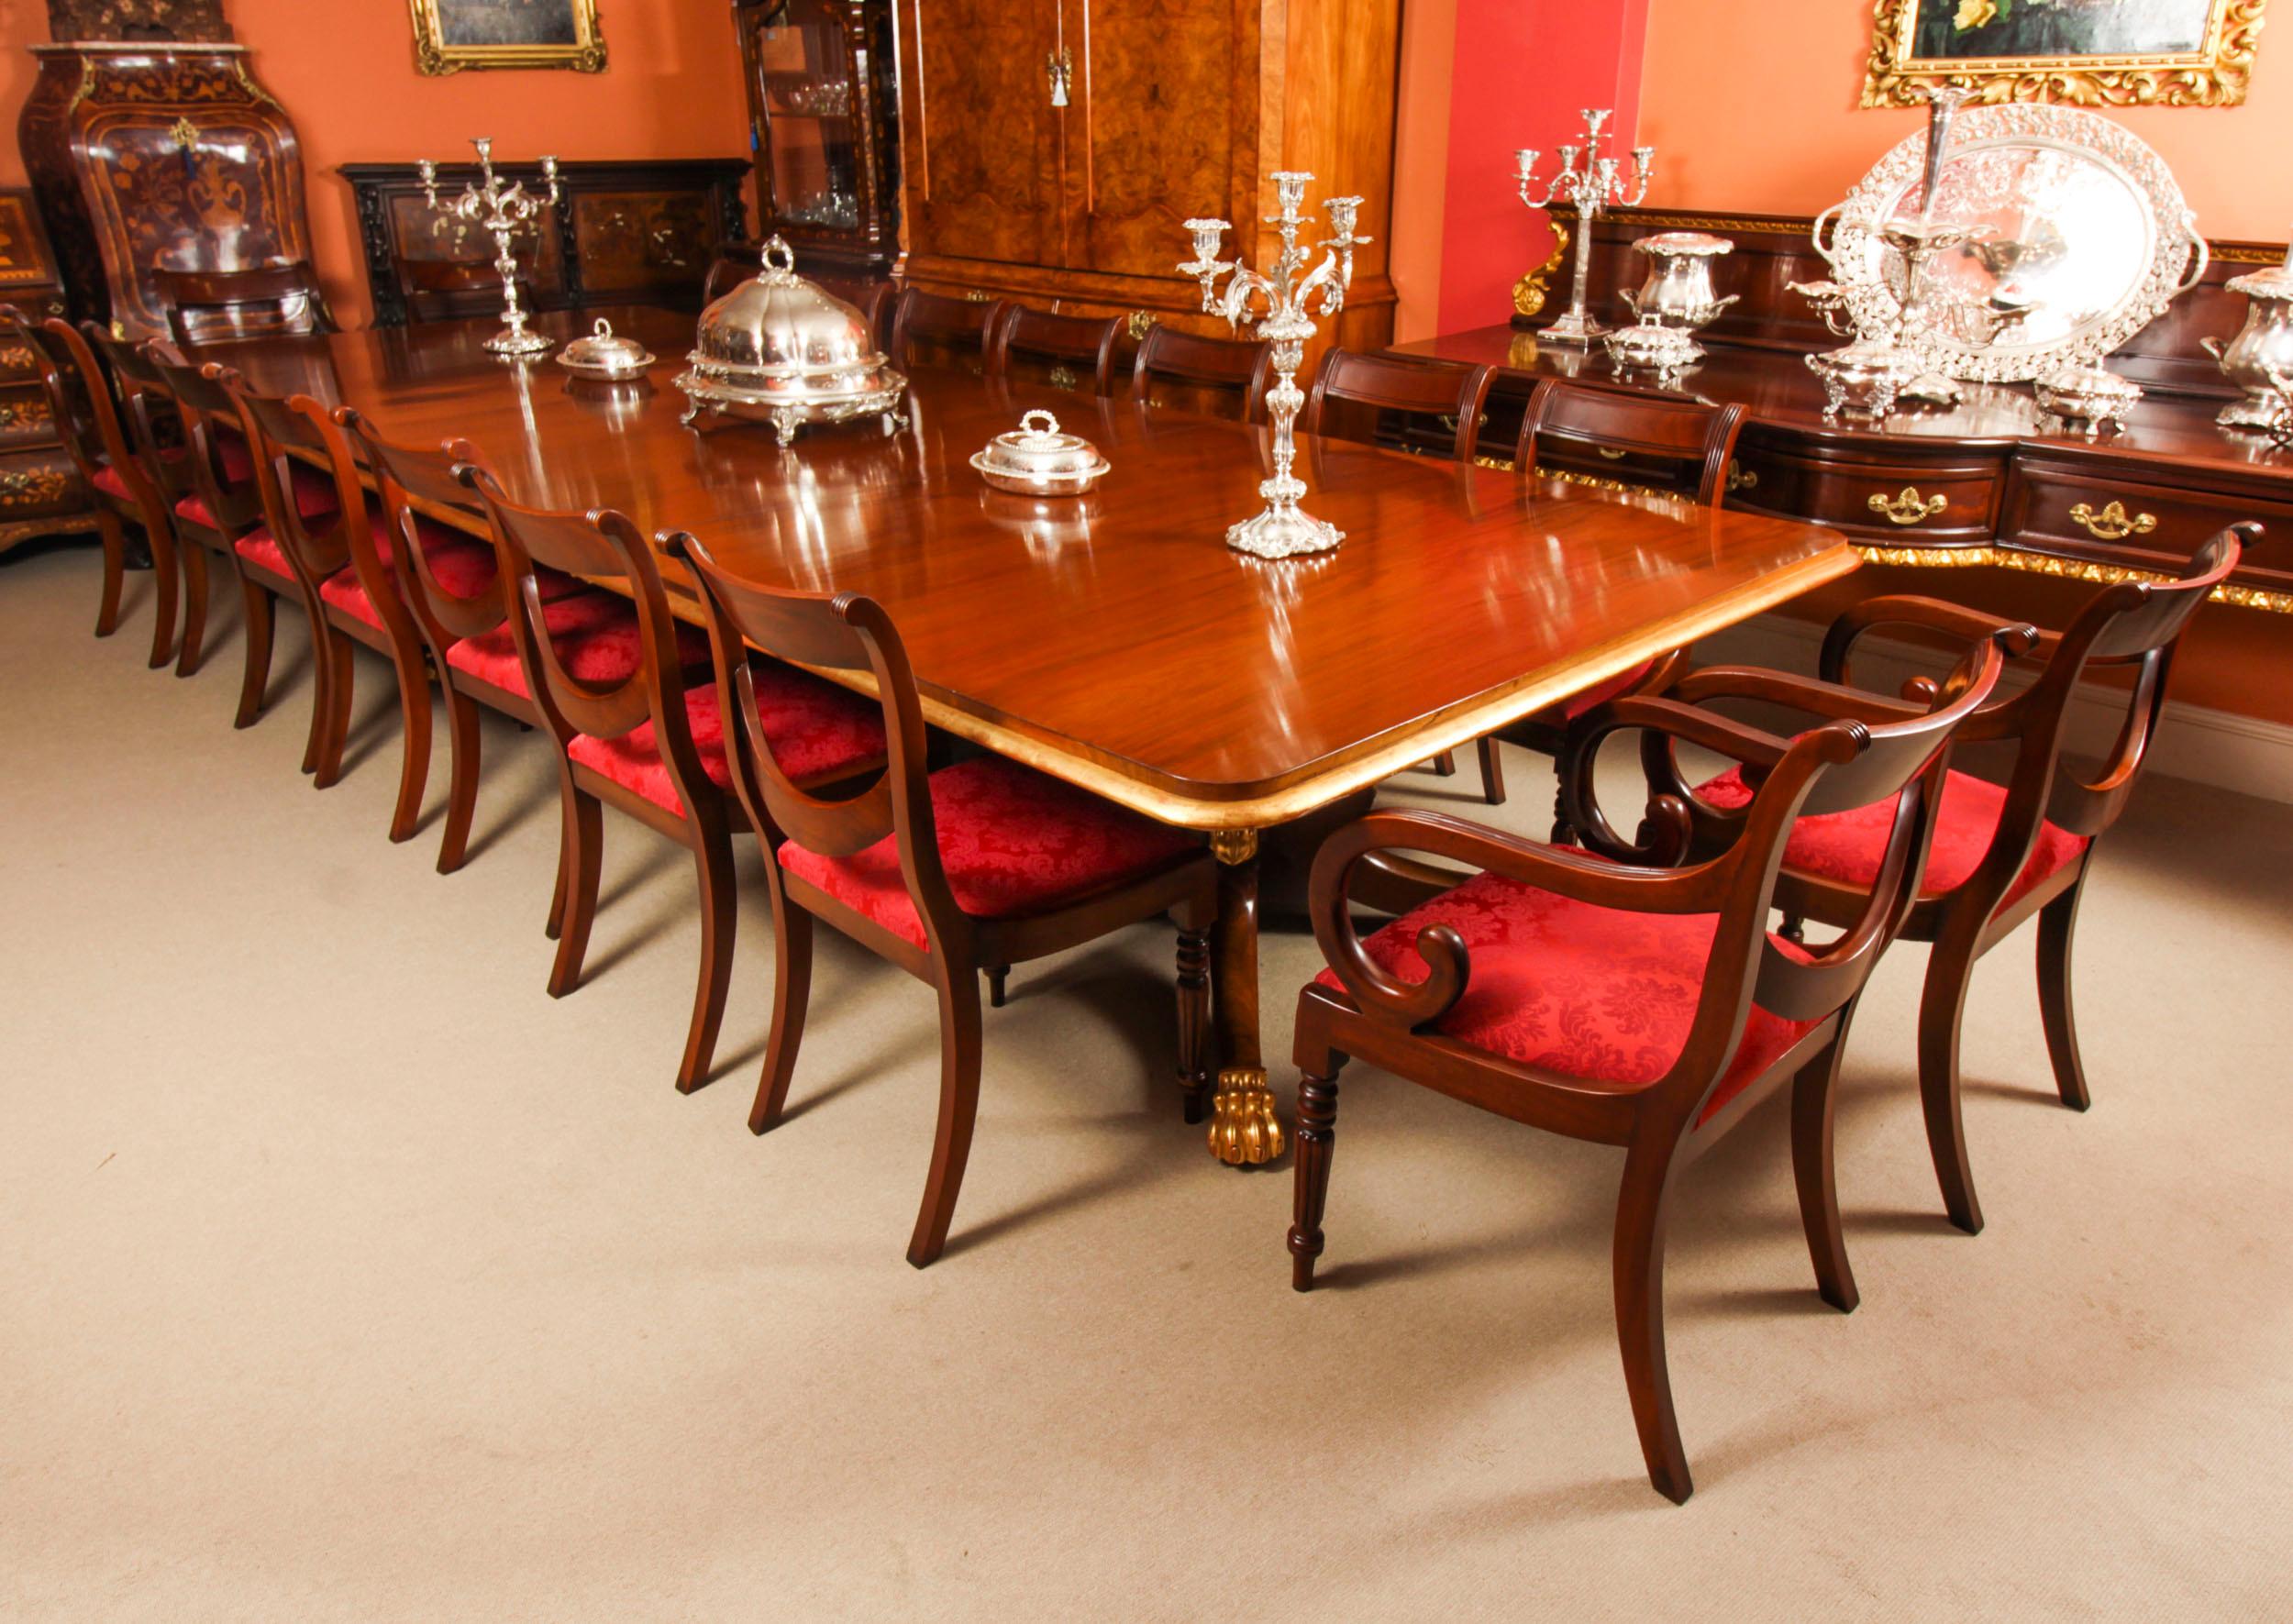 This is an elegant antique Irish Regency Period mahogany & parcel-gilt dining table, Circa 1820 in date with a set of eighteen Regency Revival swag back dining chairs.

The table top is of beautiful flame mahogany and there is no mistaking the